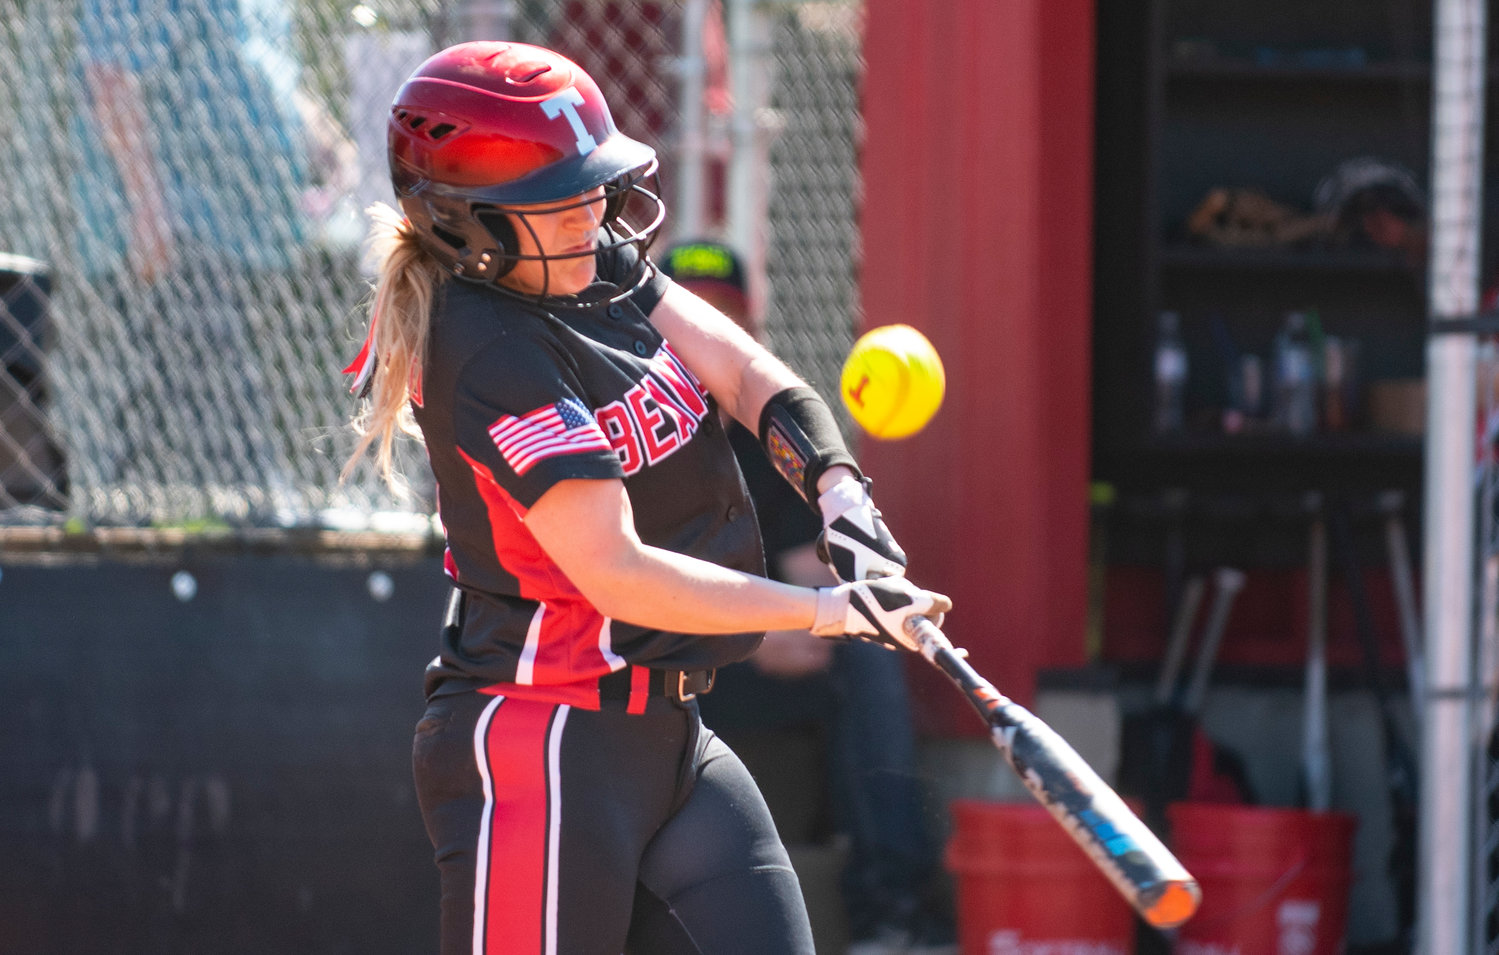 Tenino senior Cassie Cannon fouls a pitch off against Elma on Tuesday.